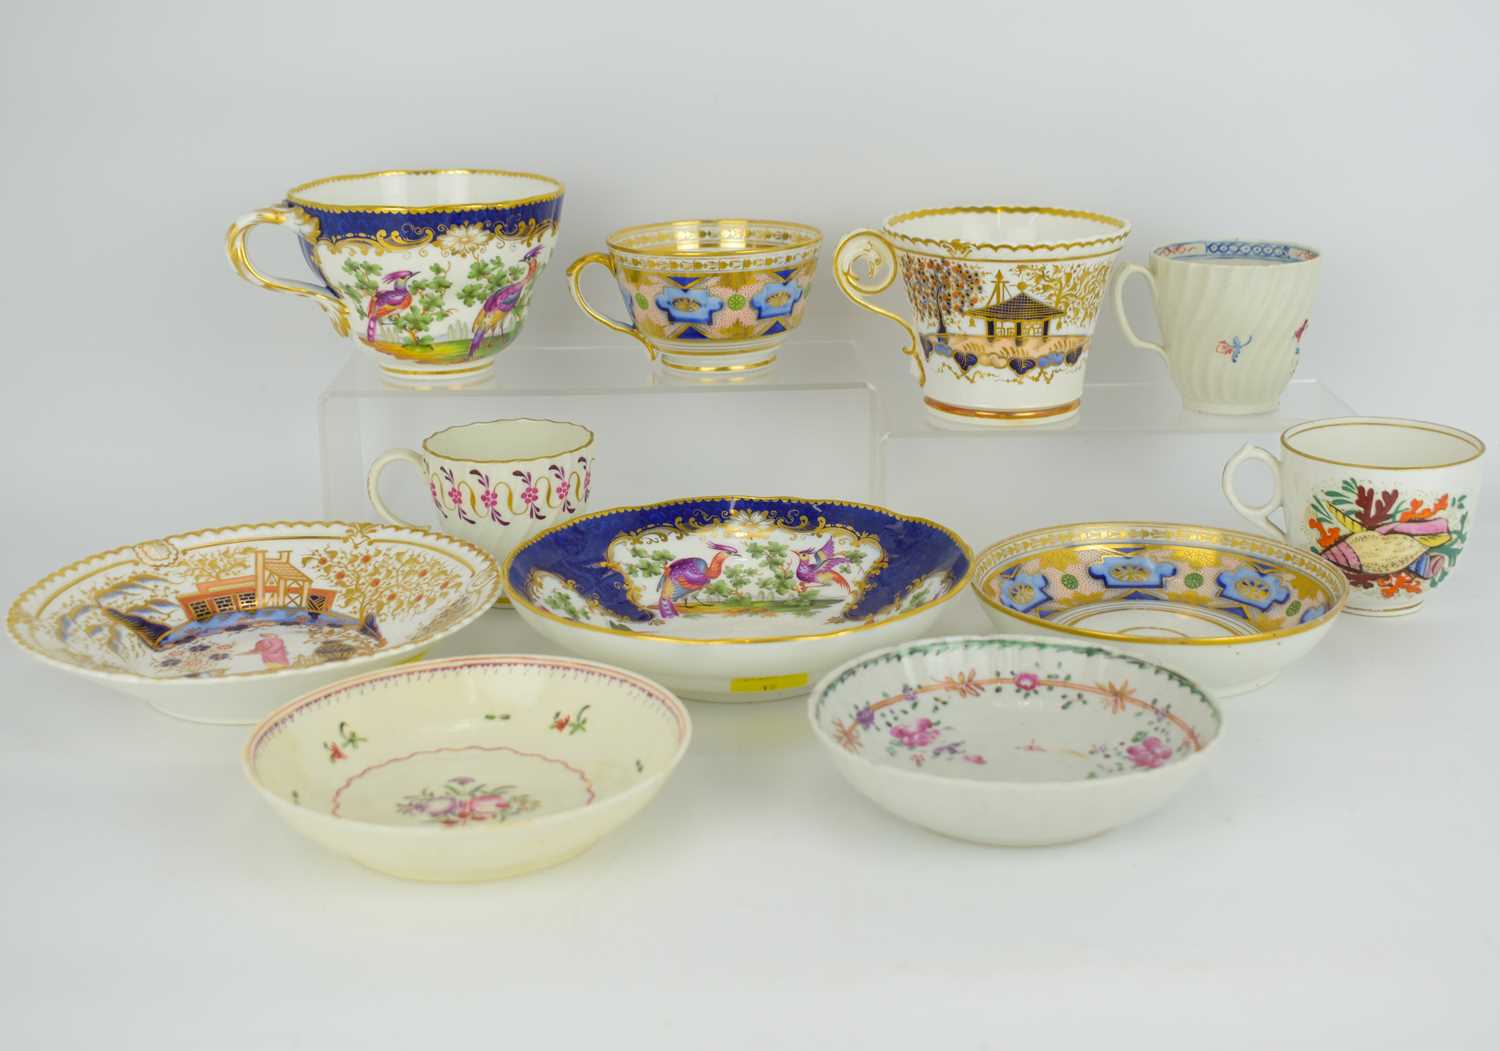 A collection of late 18th and 19th century porcelain teaware, to include a Herculaneum porcelain cup